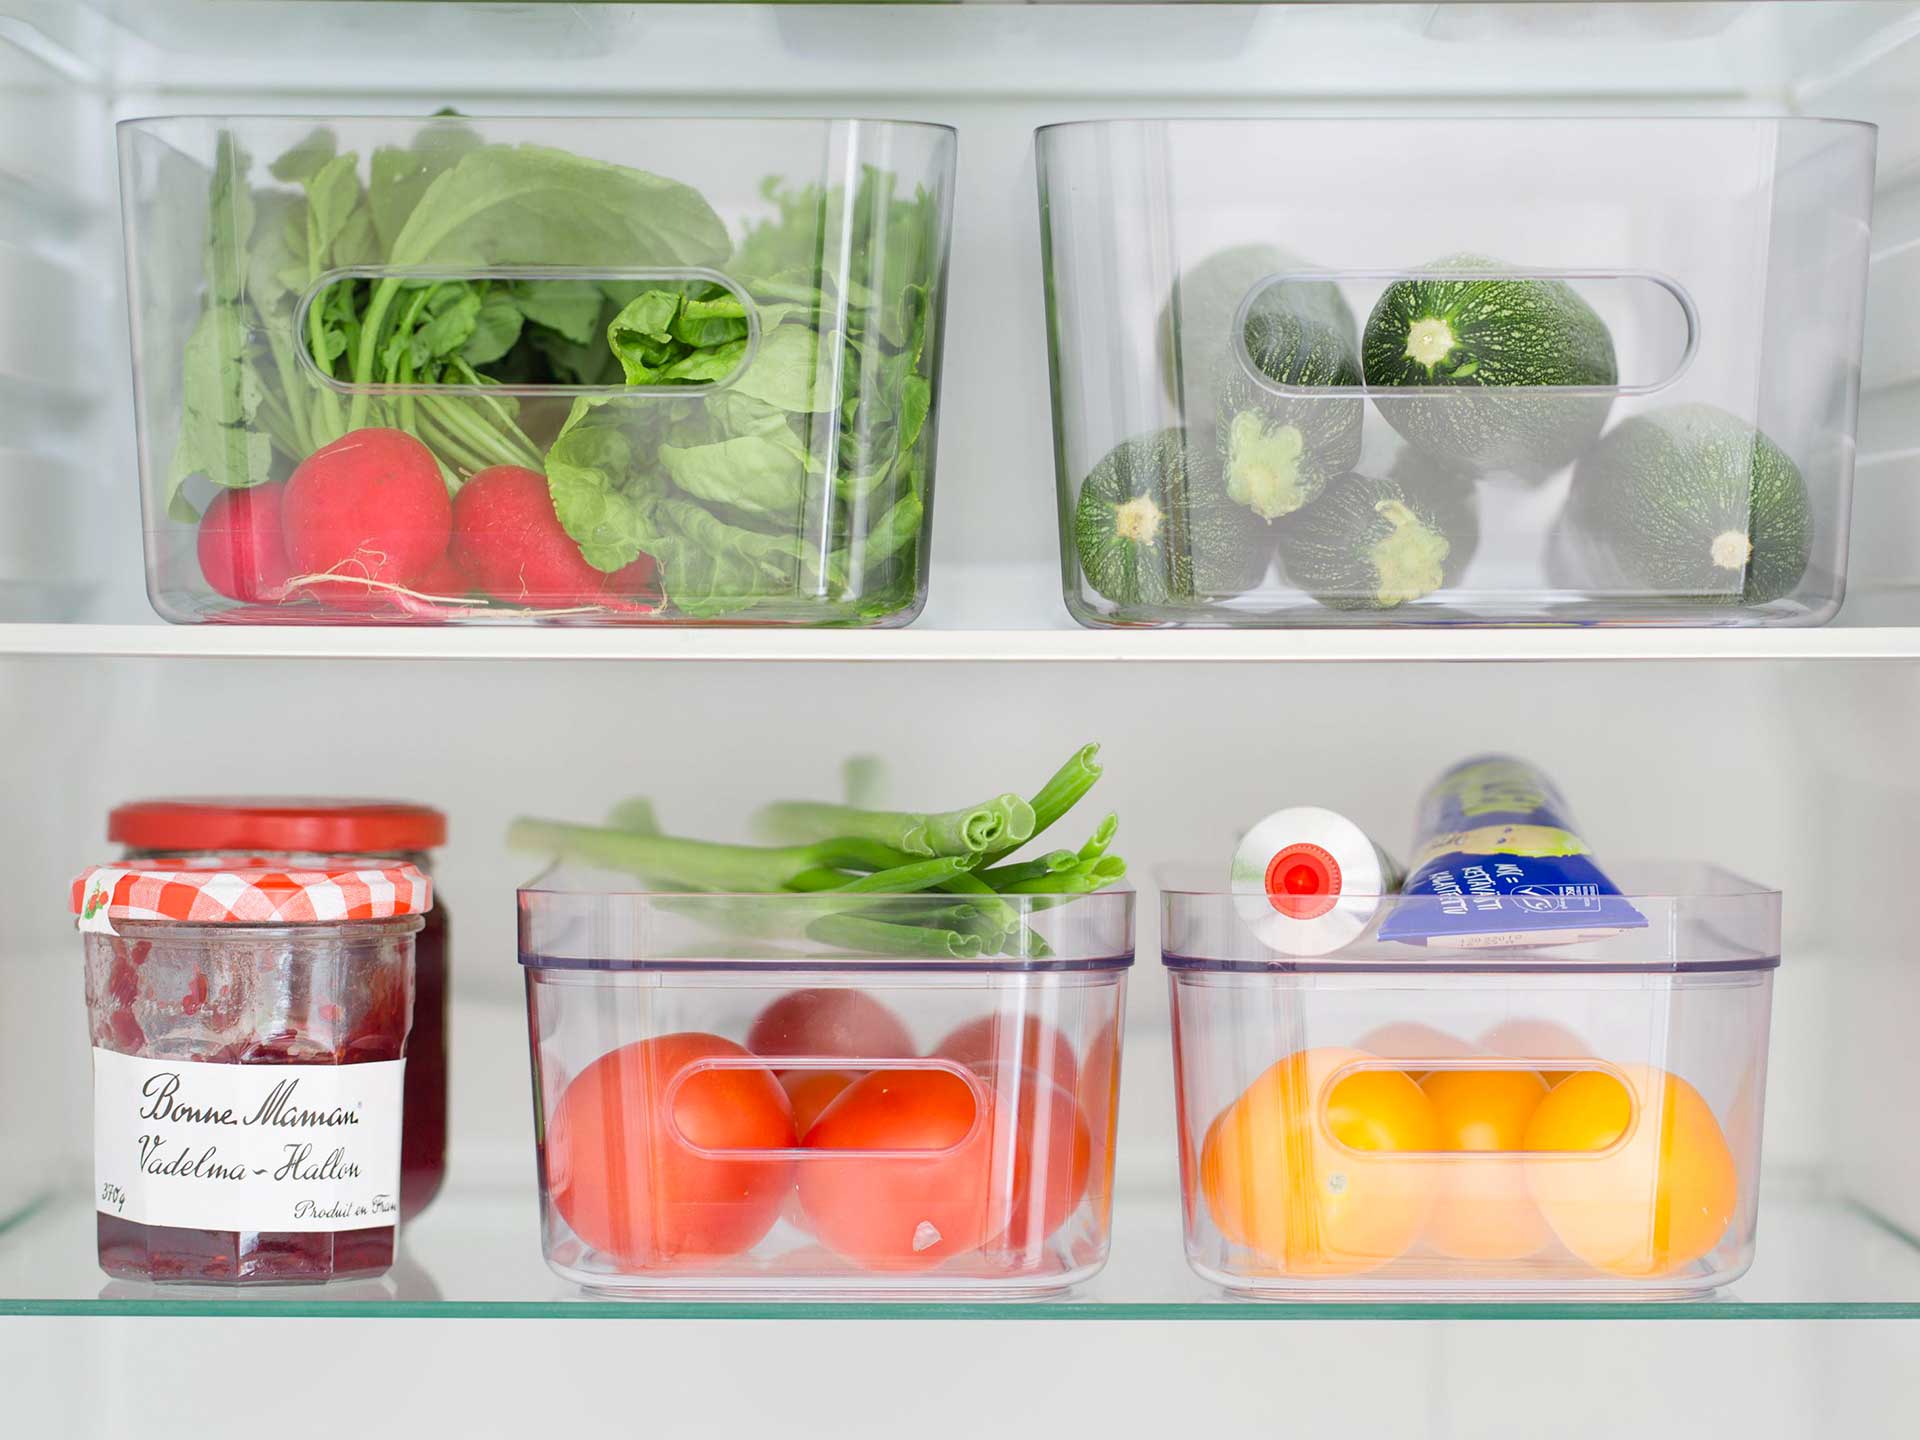 Organise your fridge, so you can be sustainable with your food